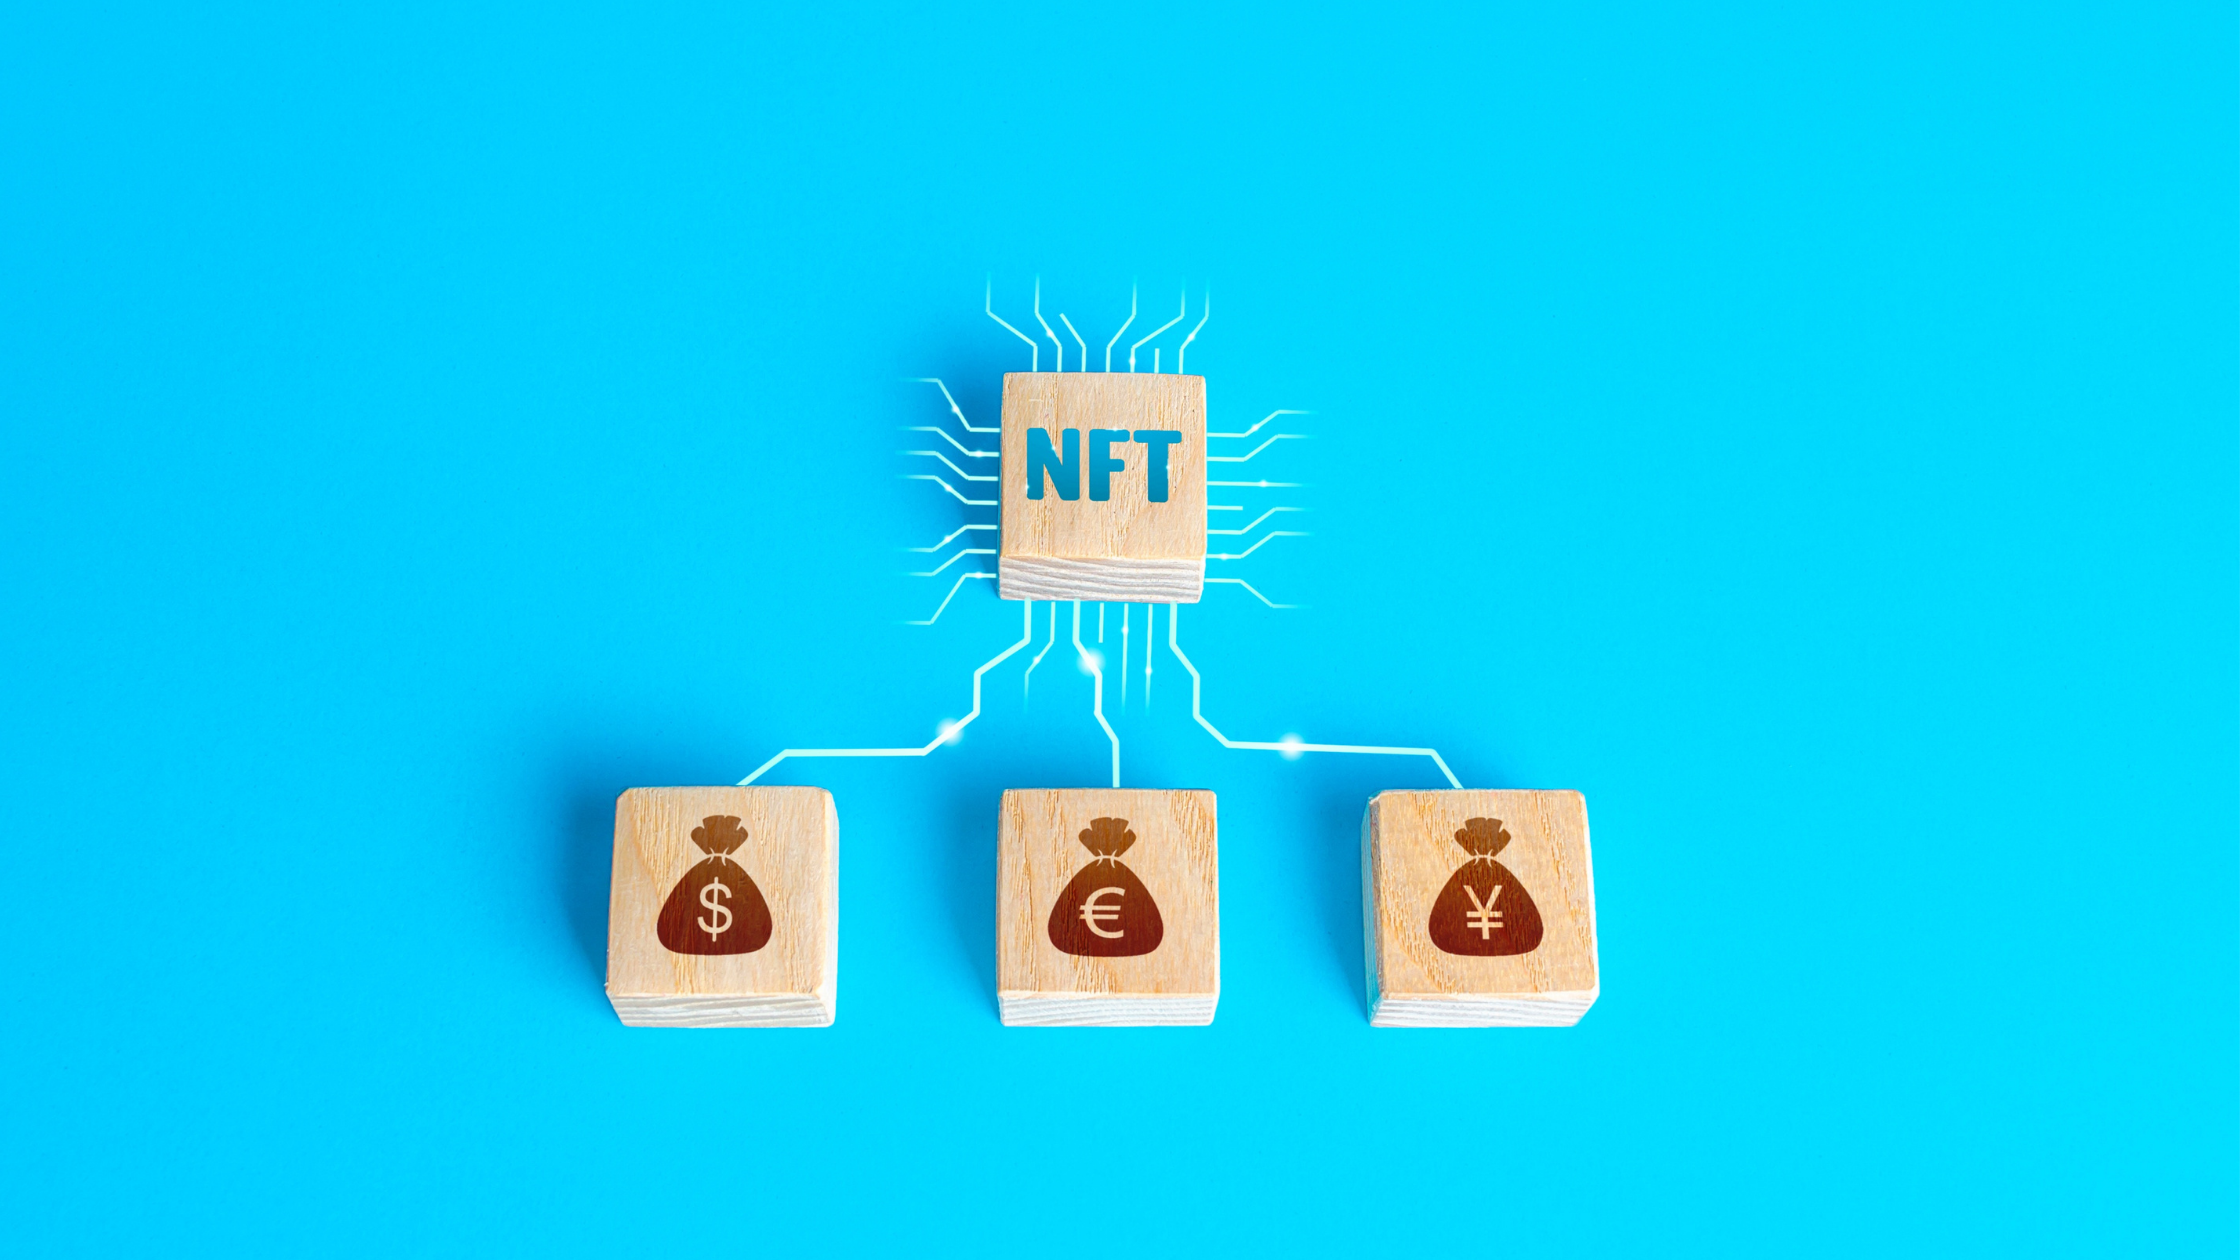 How to buy and sell NFT?